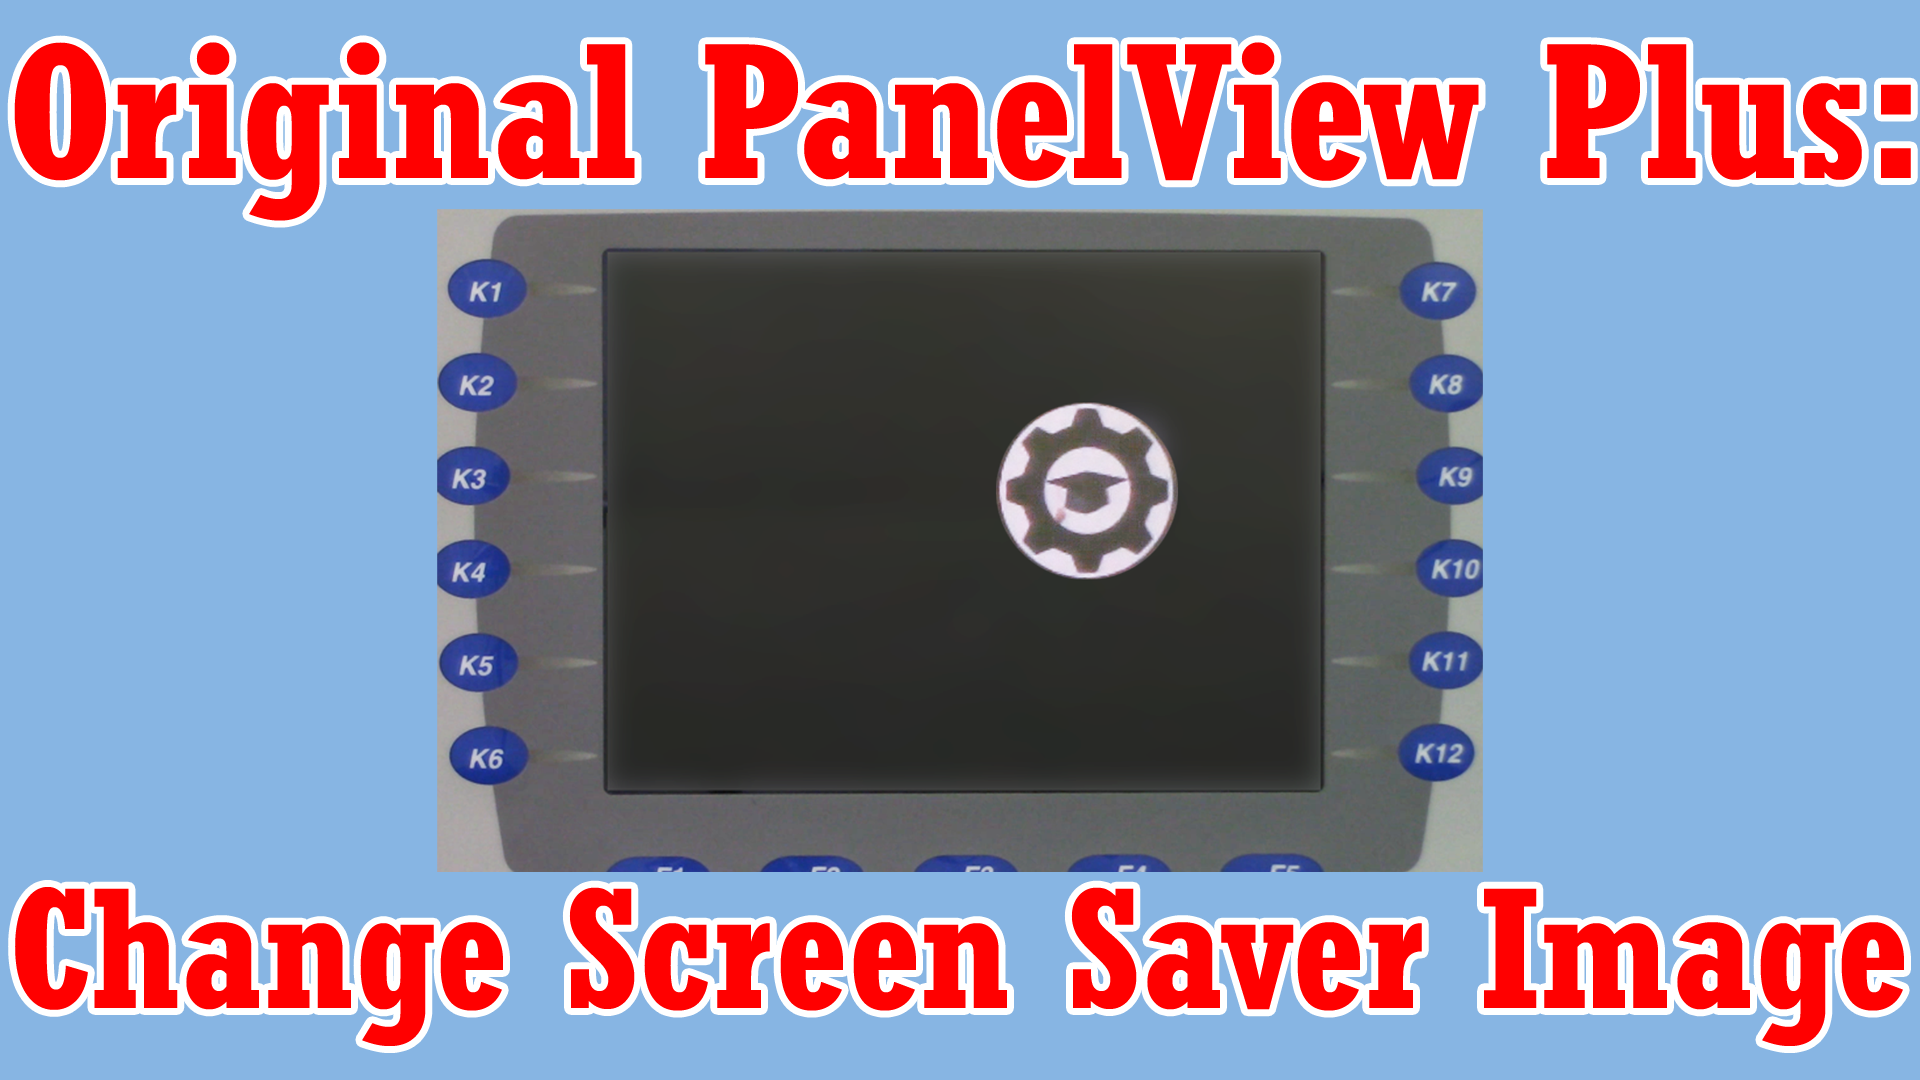 PanelView Plus - Changing Screen Saver Image (3.0 to 5.1) (M4E40)